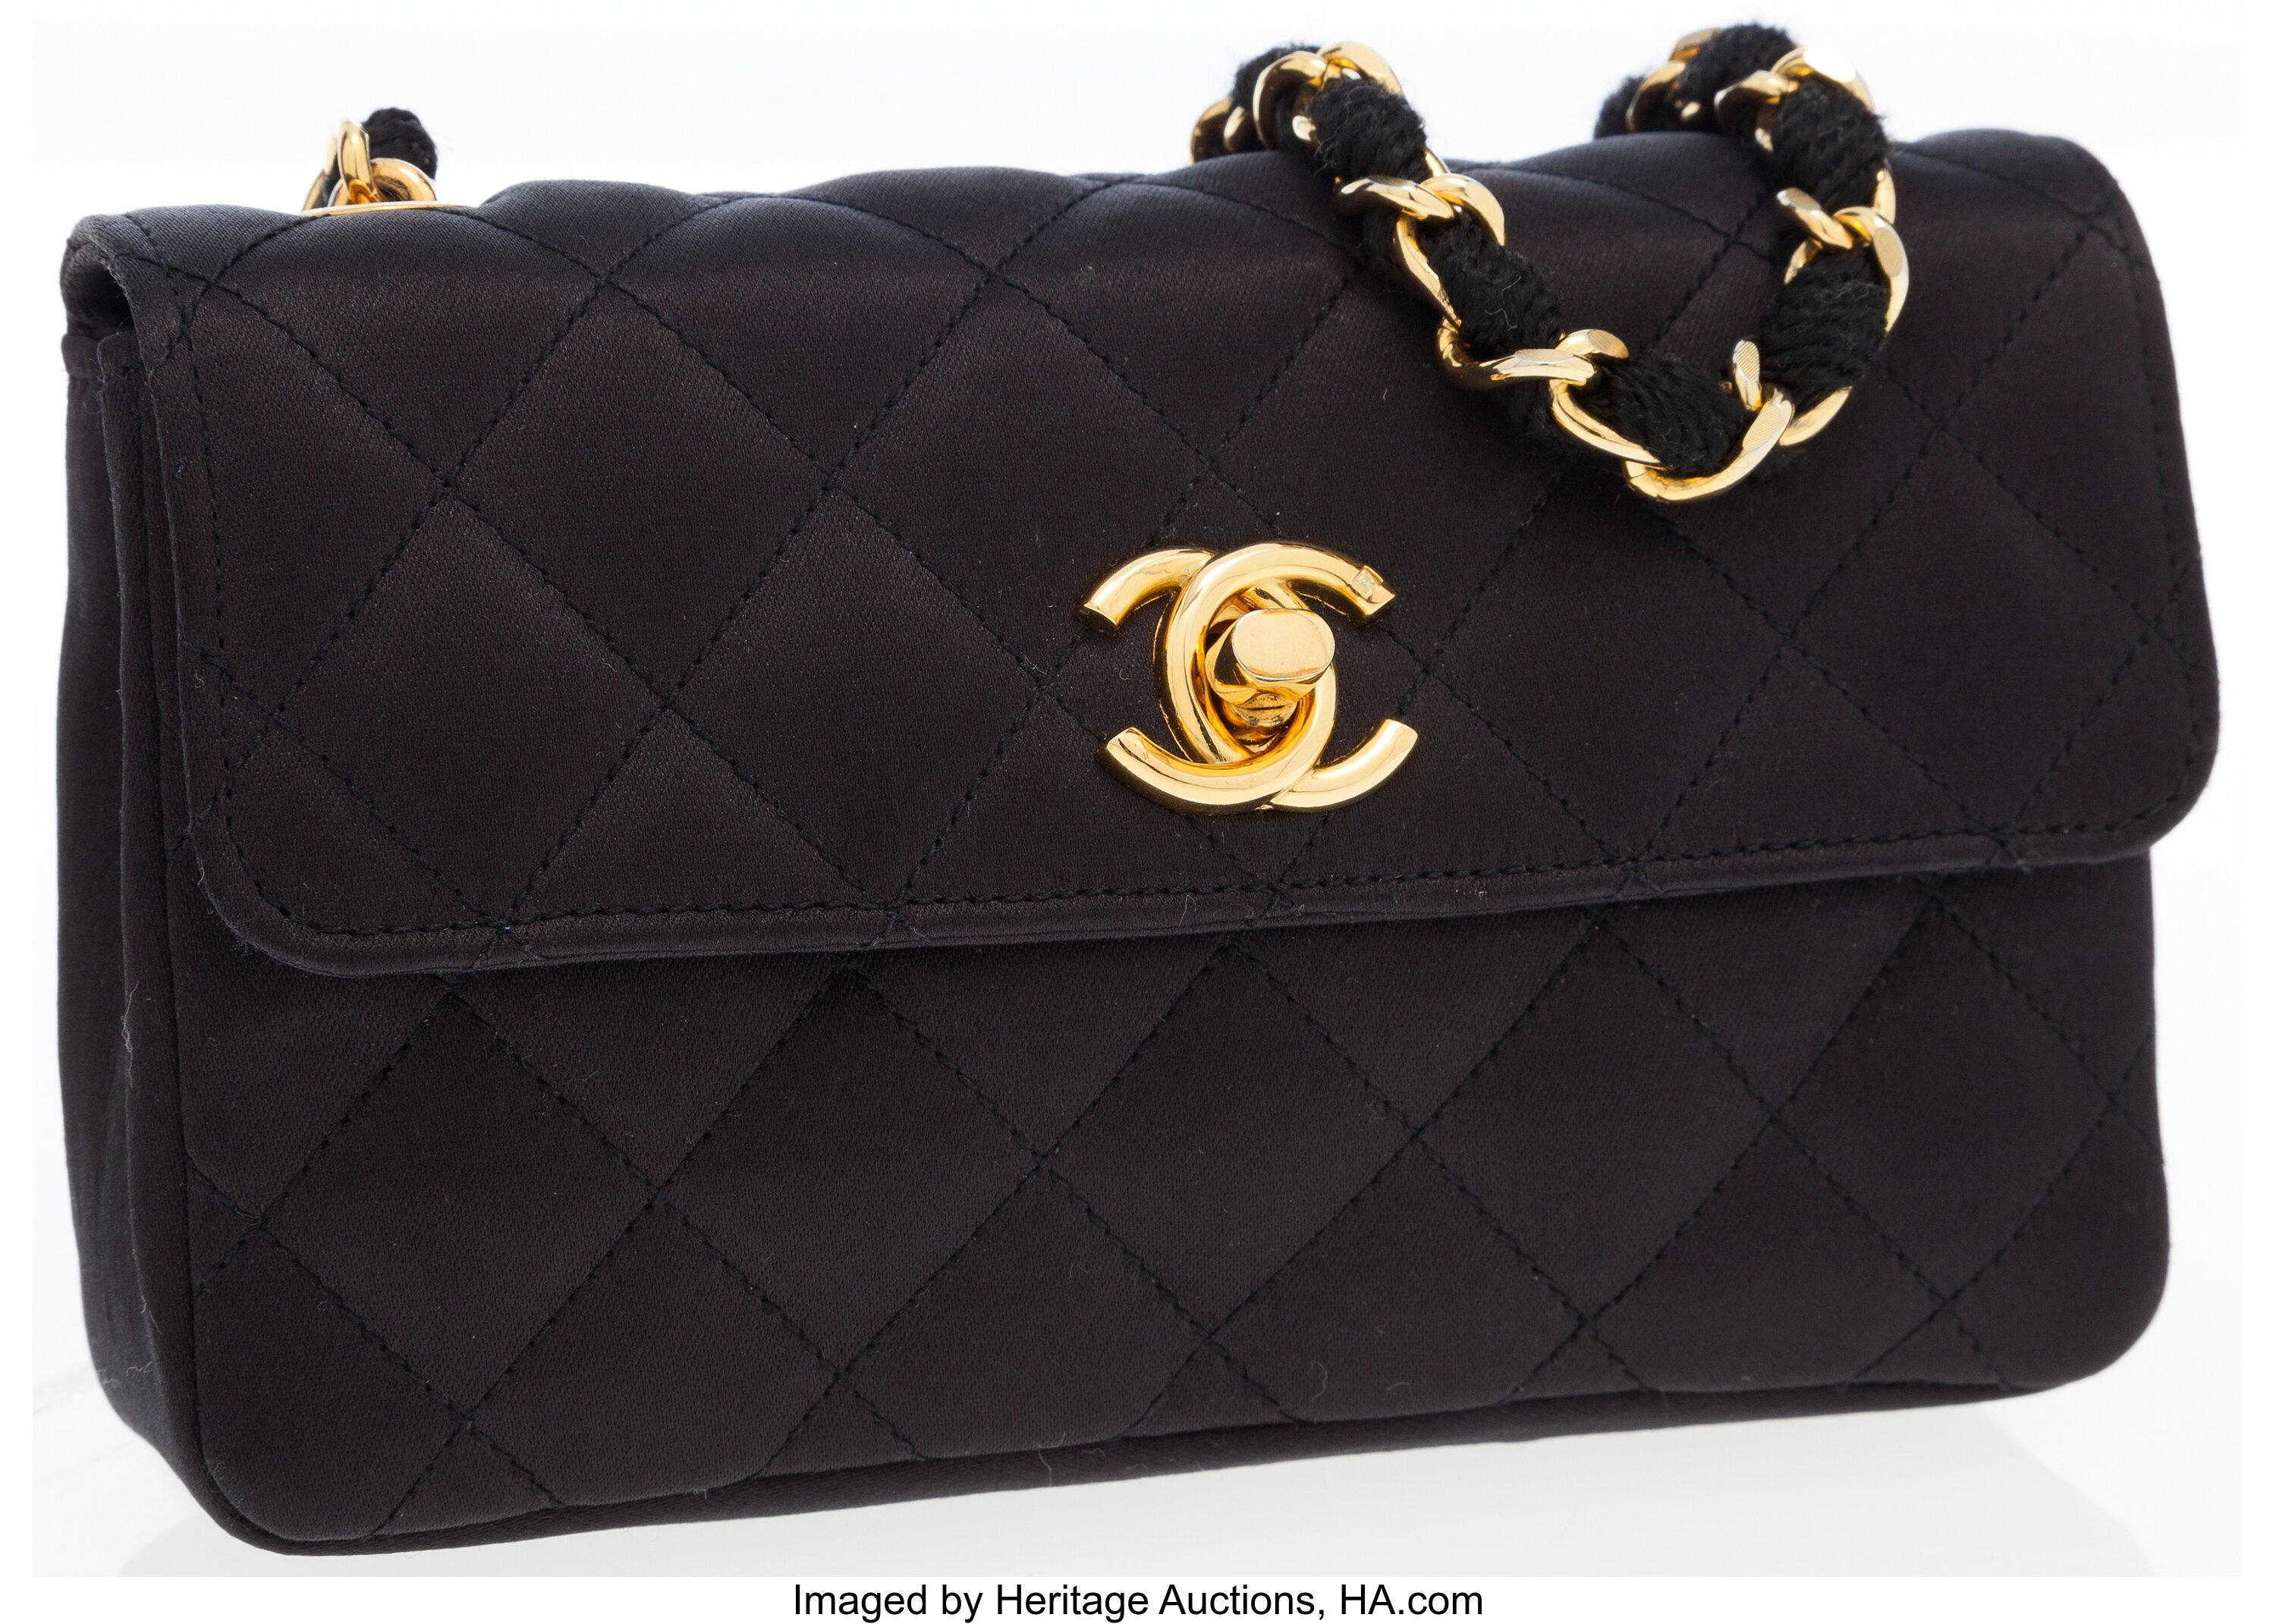 Chanel Black Quilted Satin Mini Flap Bag with Gold Hardware